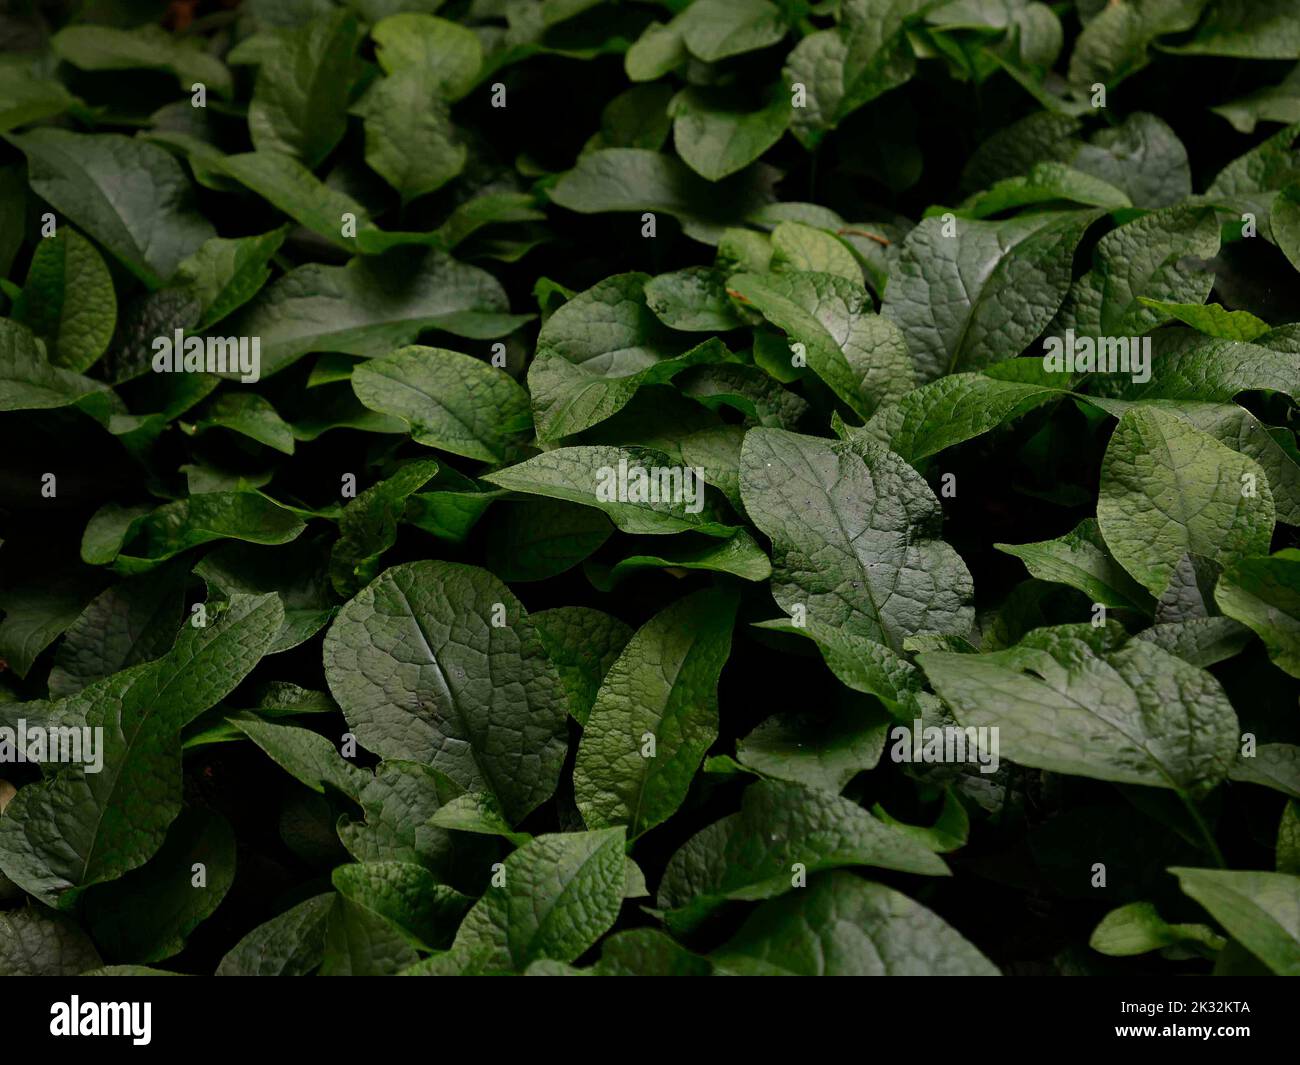 Close up of the deciduous herbaceous perennial Symphytum ibericum or Iberian Comfrey, a clump forming garden plant for shade. Stock Photo